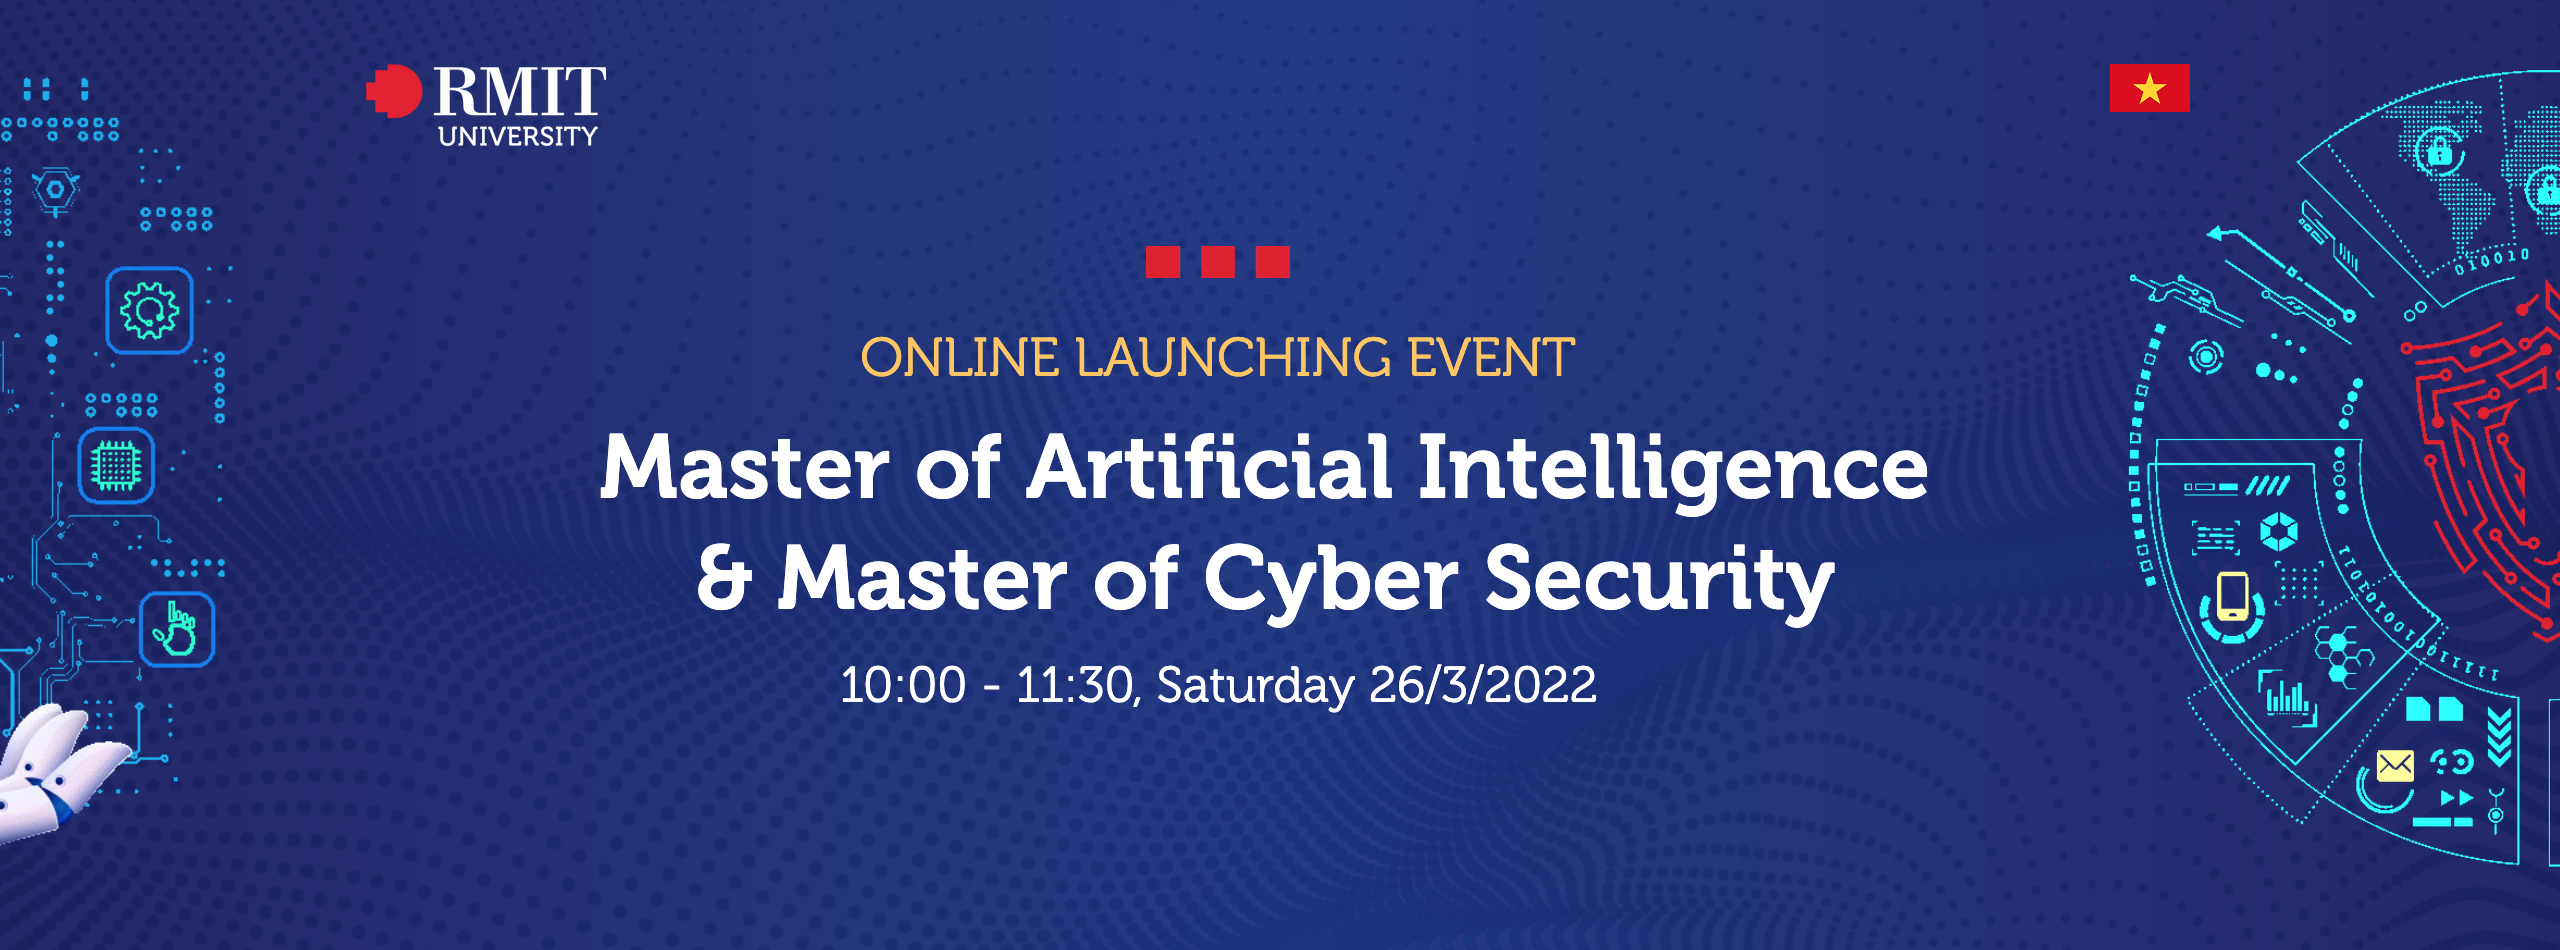 ONLINE LAUNCHING EVENT Master of Artificial Intelligence & Master of Cyber Security 10:00 - 11:30, Saturday 26/3/2022 REGISTER NOW